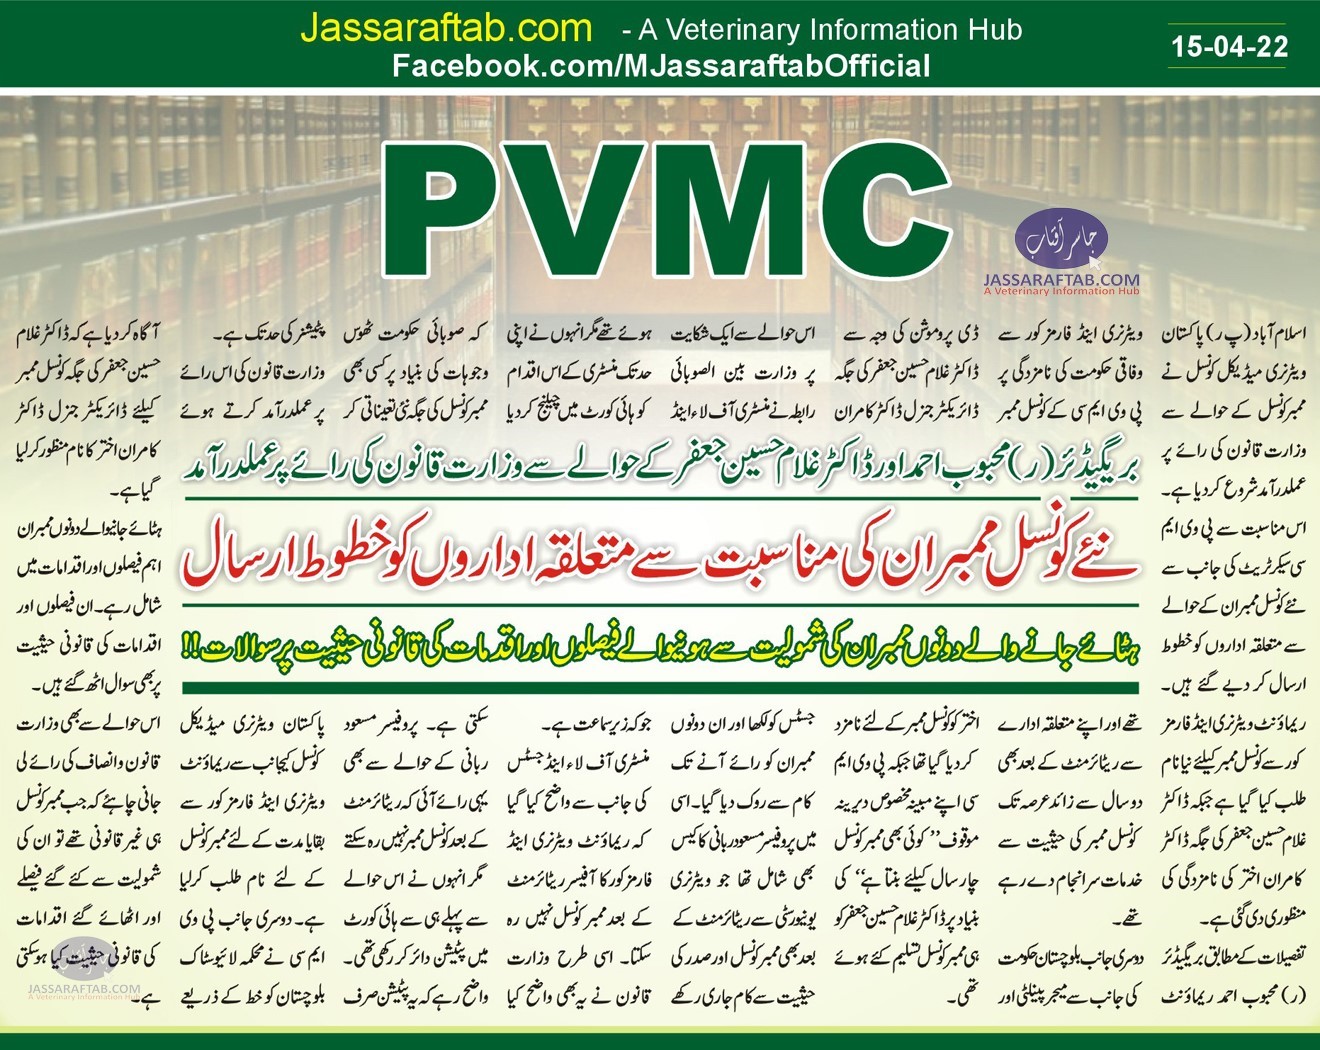 PVMC writes letters to implement the Law Ministry Opinion on PVMC Member